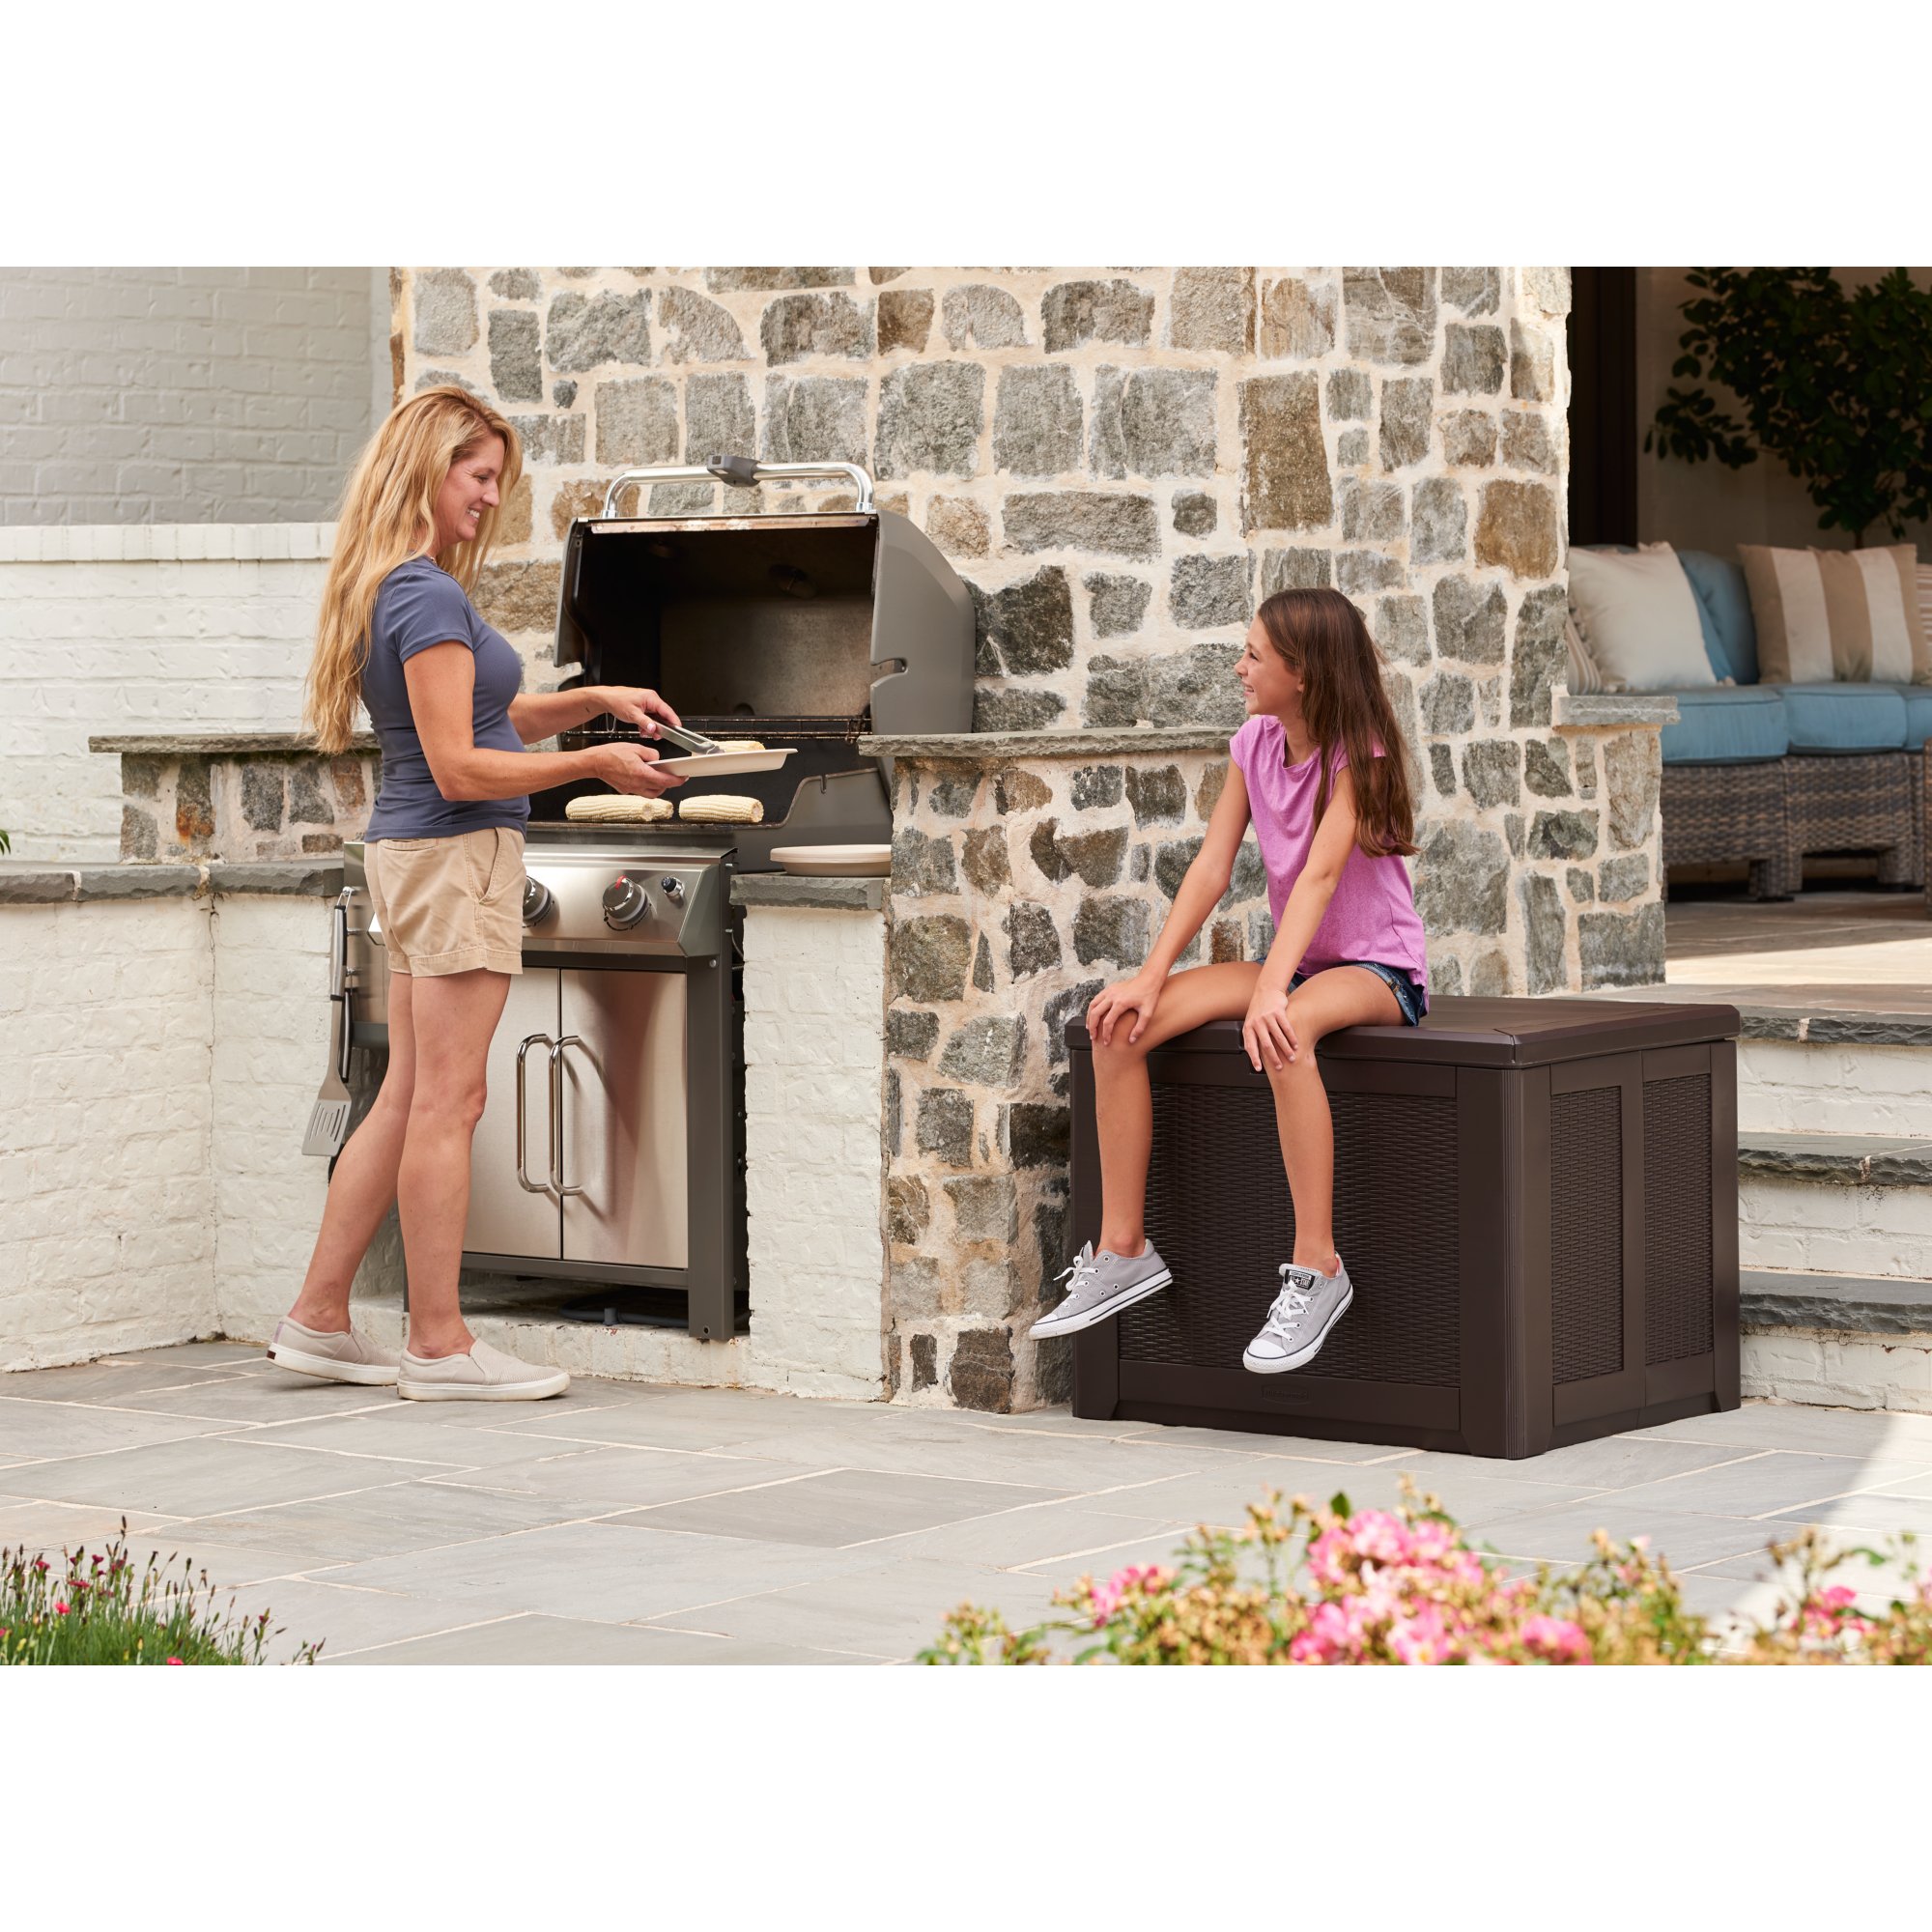 https://s7d9.scene7.com/is/image/NewellRubbermaid/2119054_RC_OS_Med_Deck_Box_Grilling_Bench_07?wid=2000&hei=2000